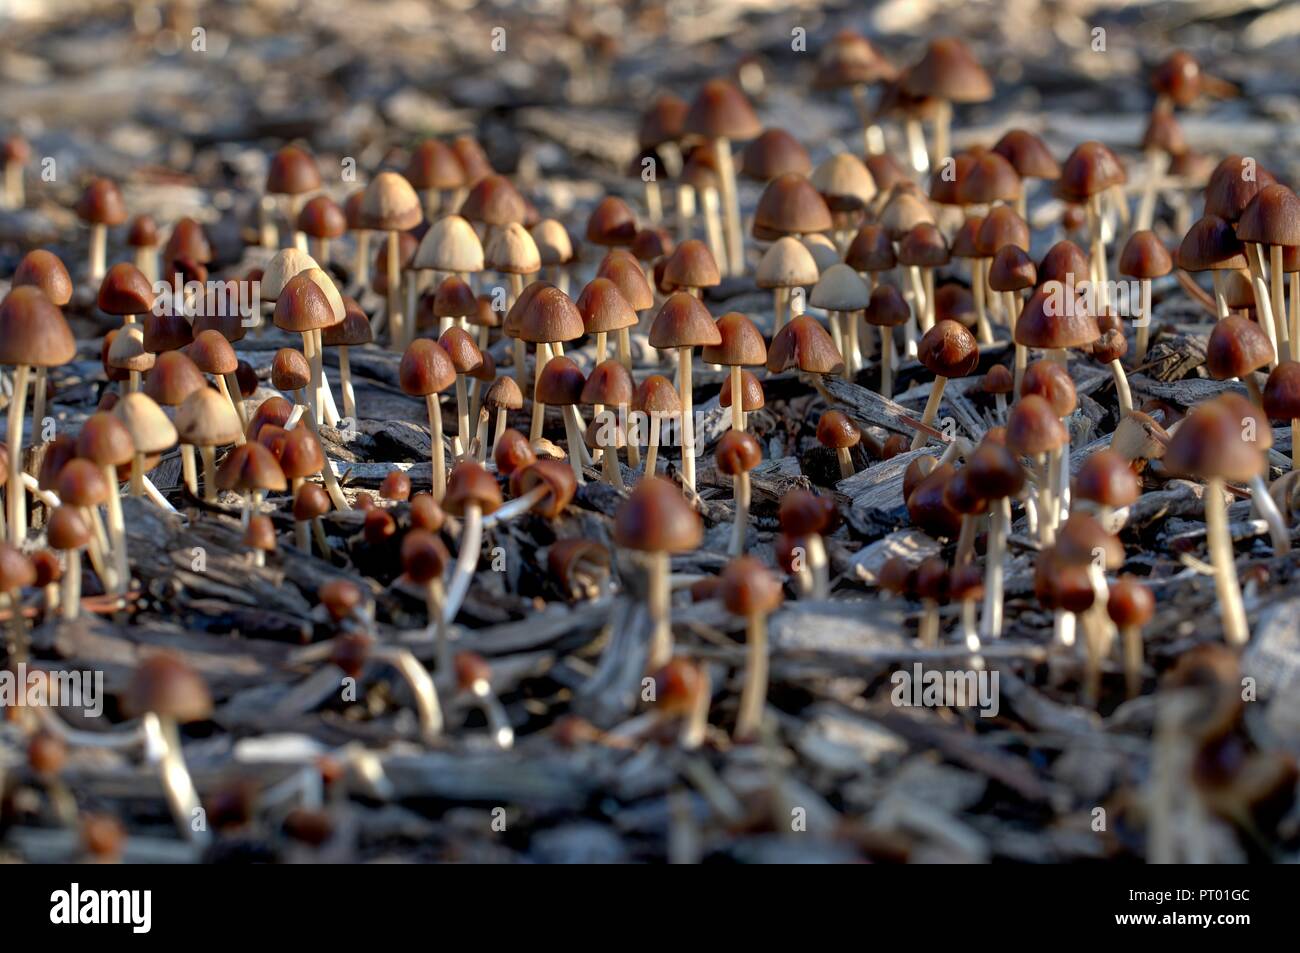 Cluster of little brown mushrooms growing from wood chips. Close up view of mushroom toadstools. Natural decomposers. Autumn fungus. Stock Photo